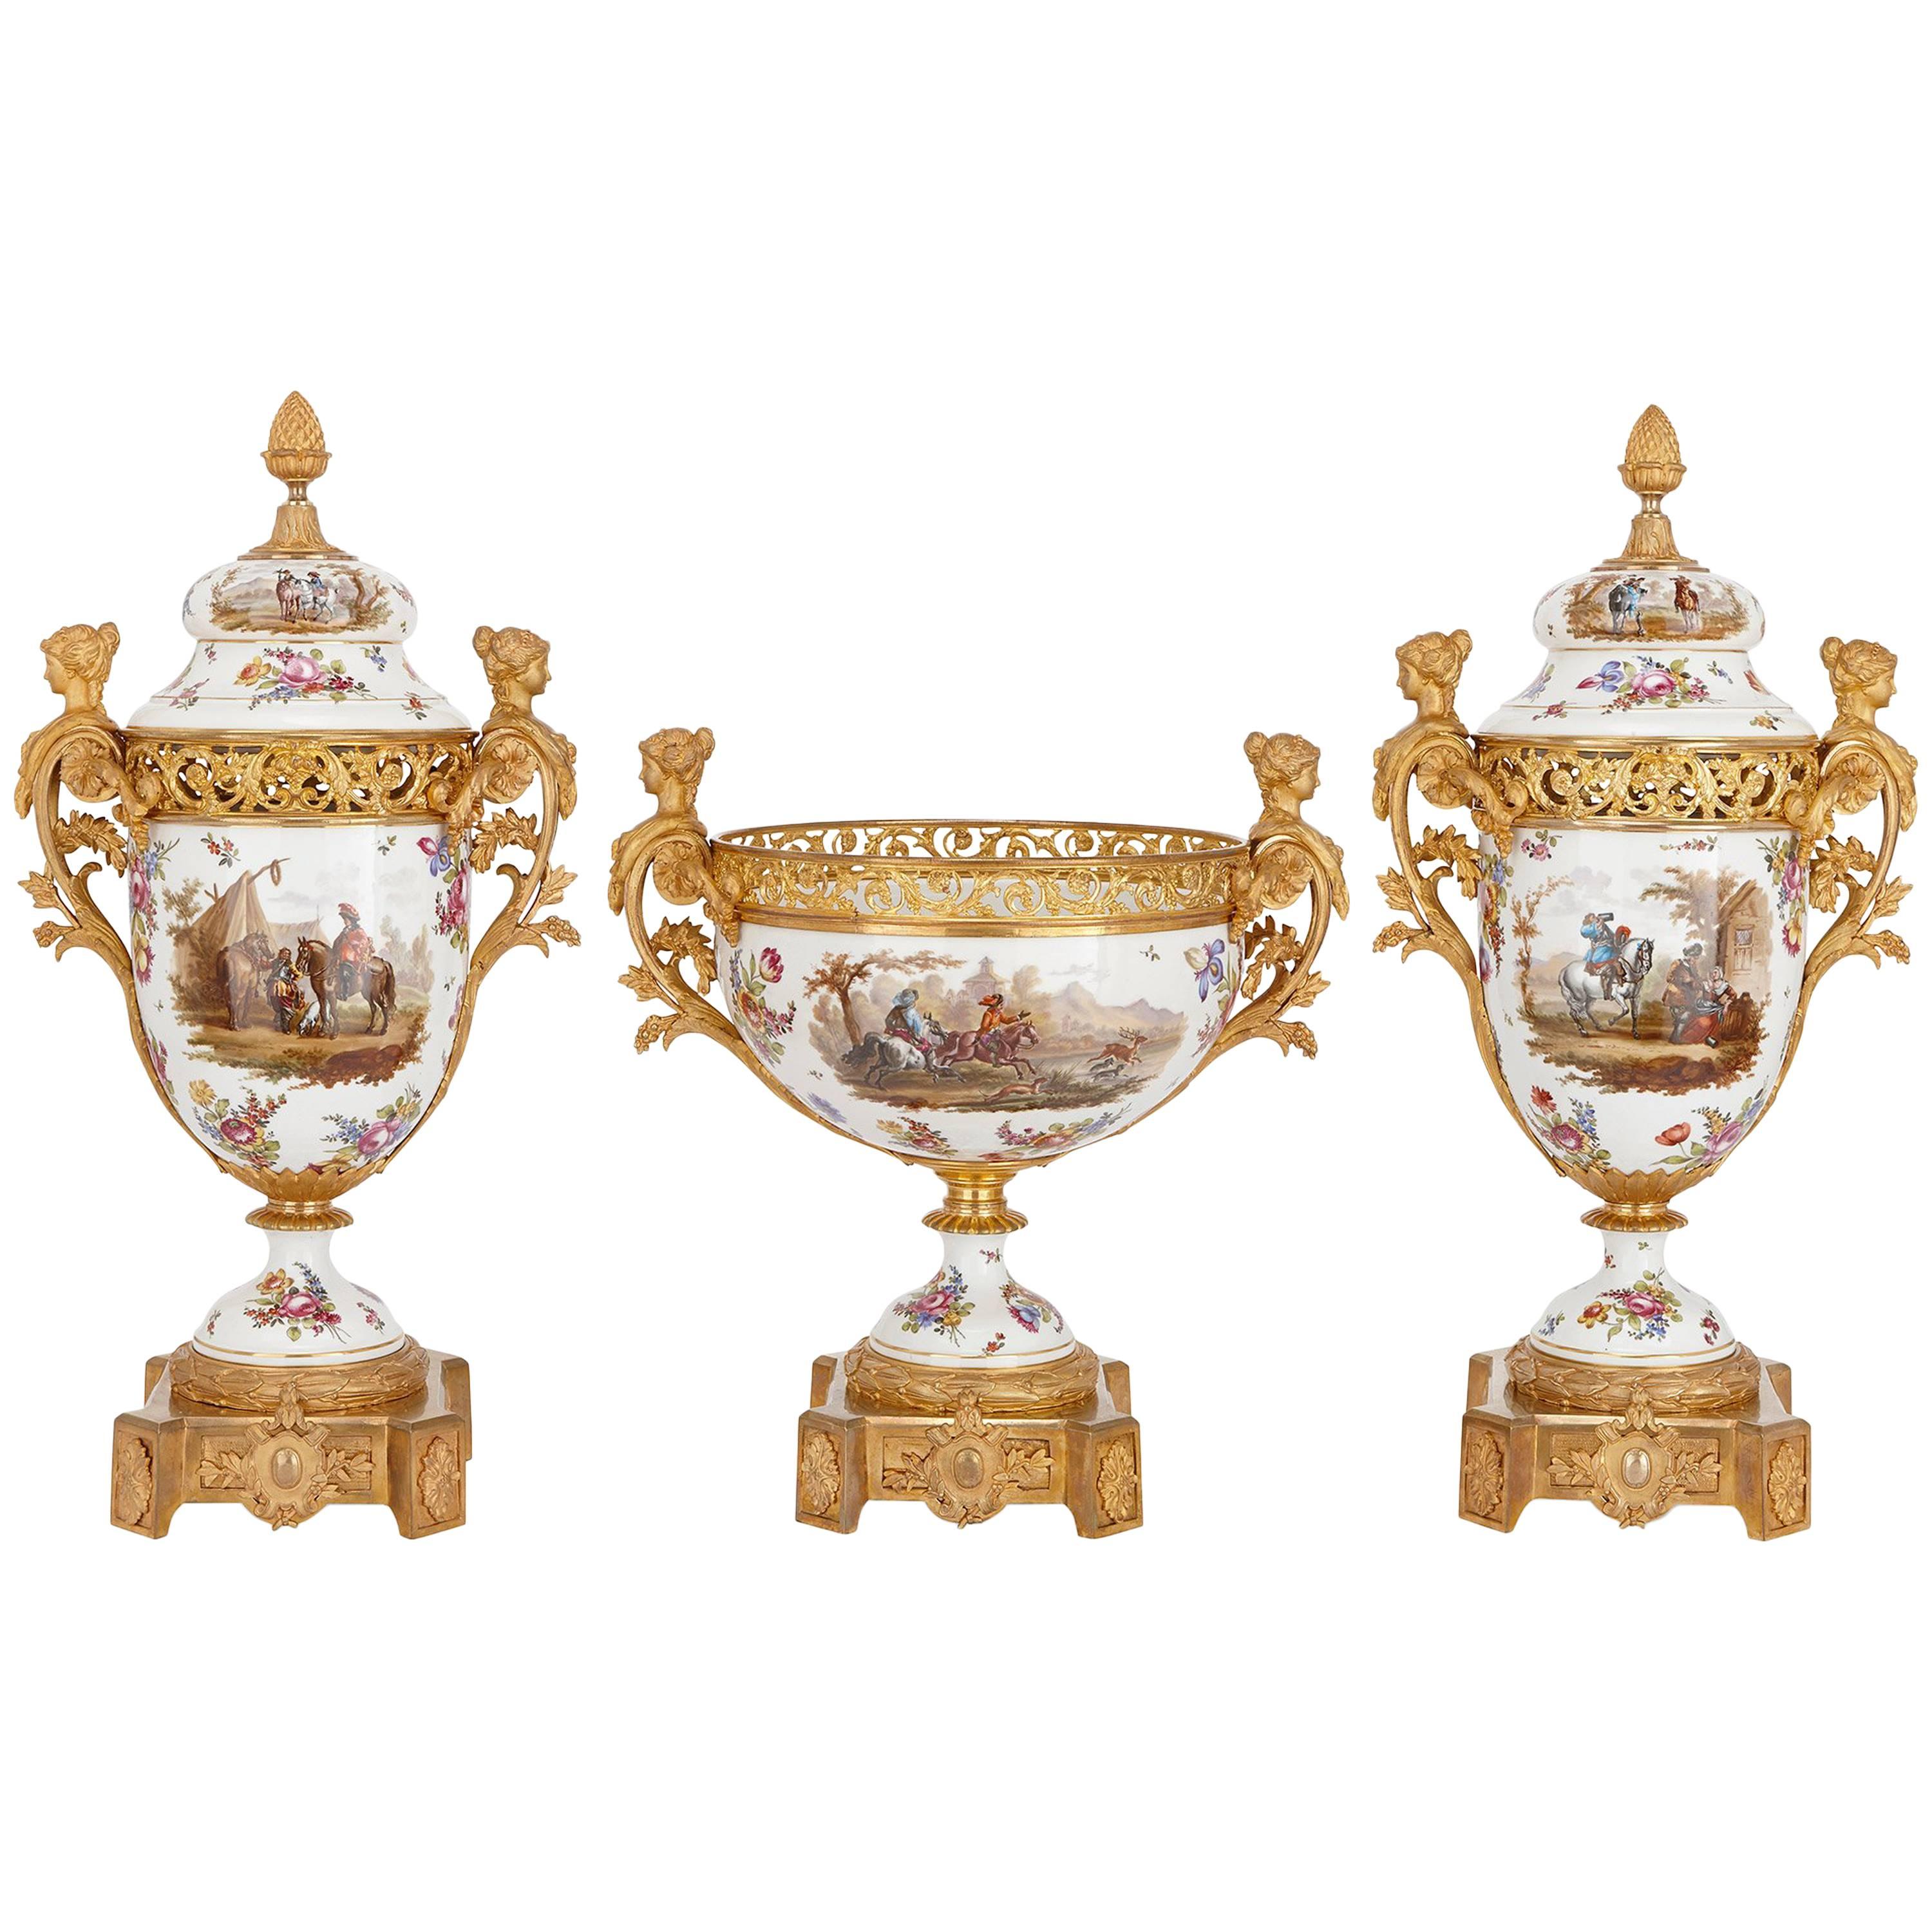 French Neoclassical Style Ormolu and Sèvres Porcelain Three-Piece Garniture